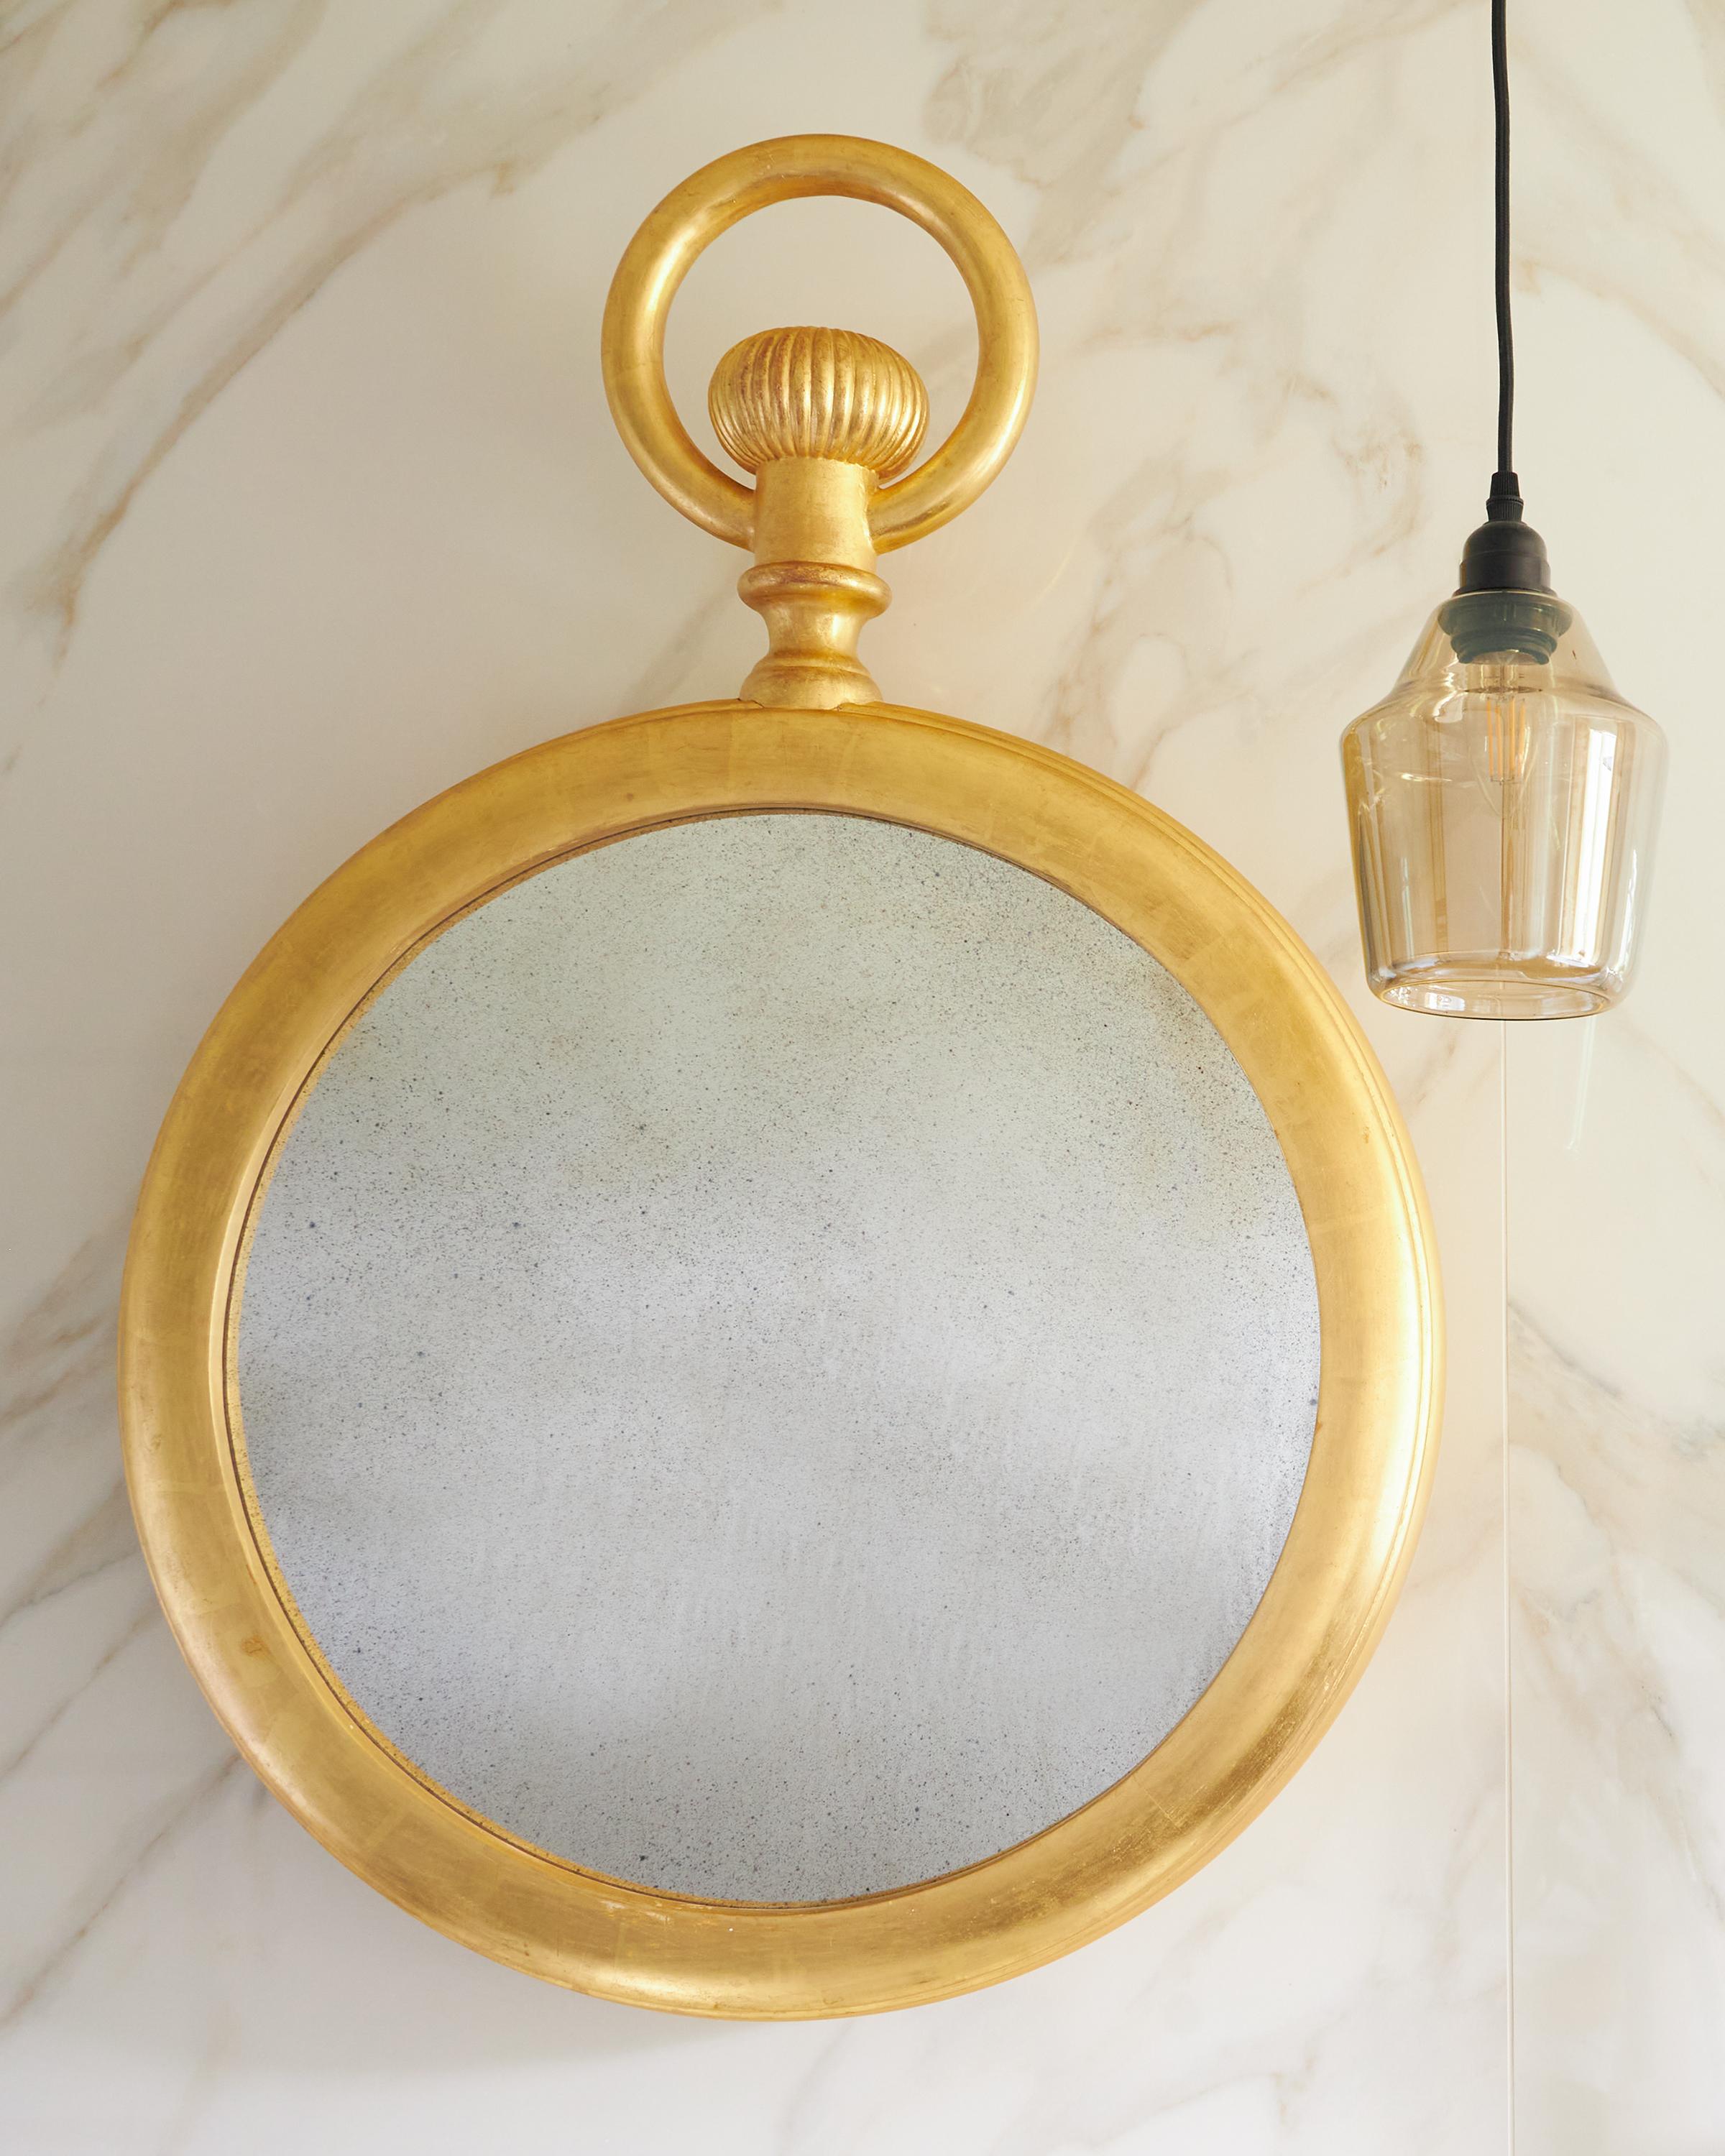 A fine giltwood pocket watch design convex mirror of Country House proportions in the manner of Piero Fornasetti. Carved detailing including a clocks distinctive top ring and turned dial. This large pocket watch mirror is fitted with a specialist